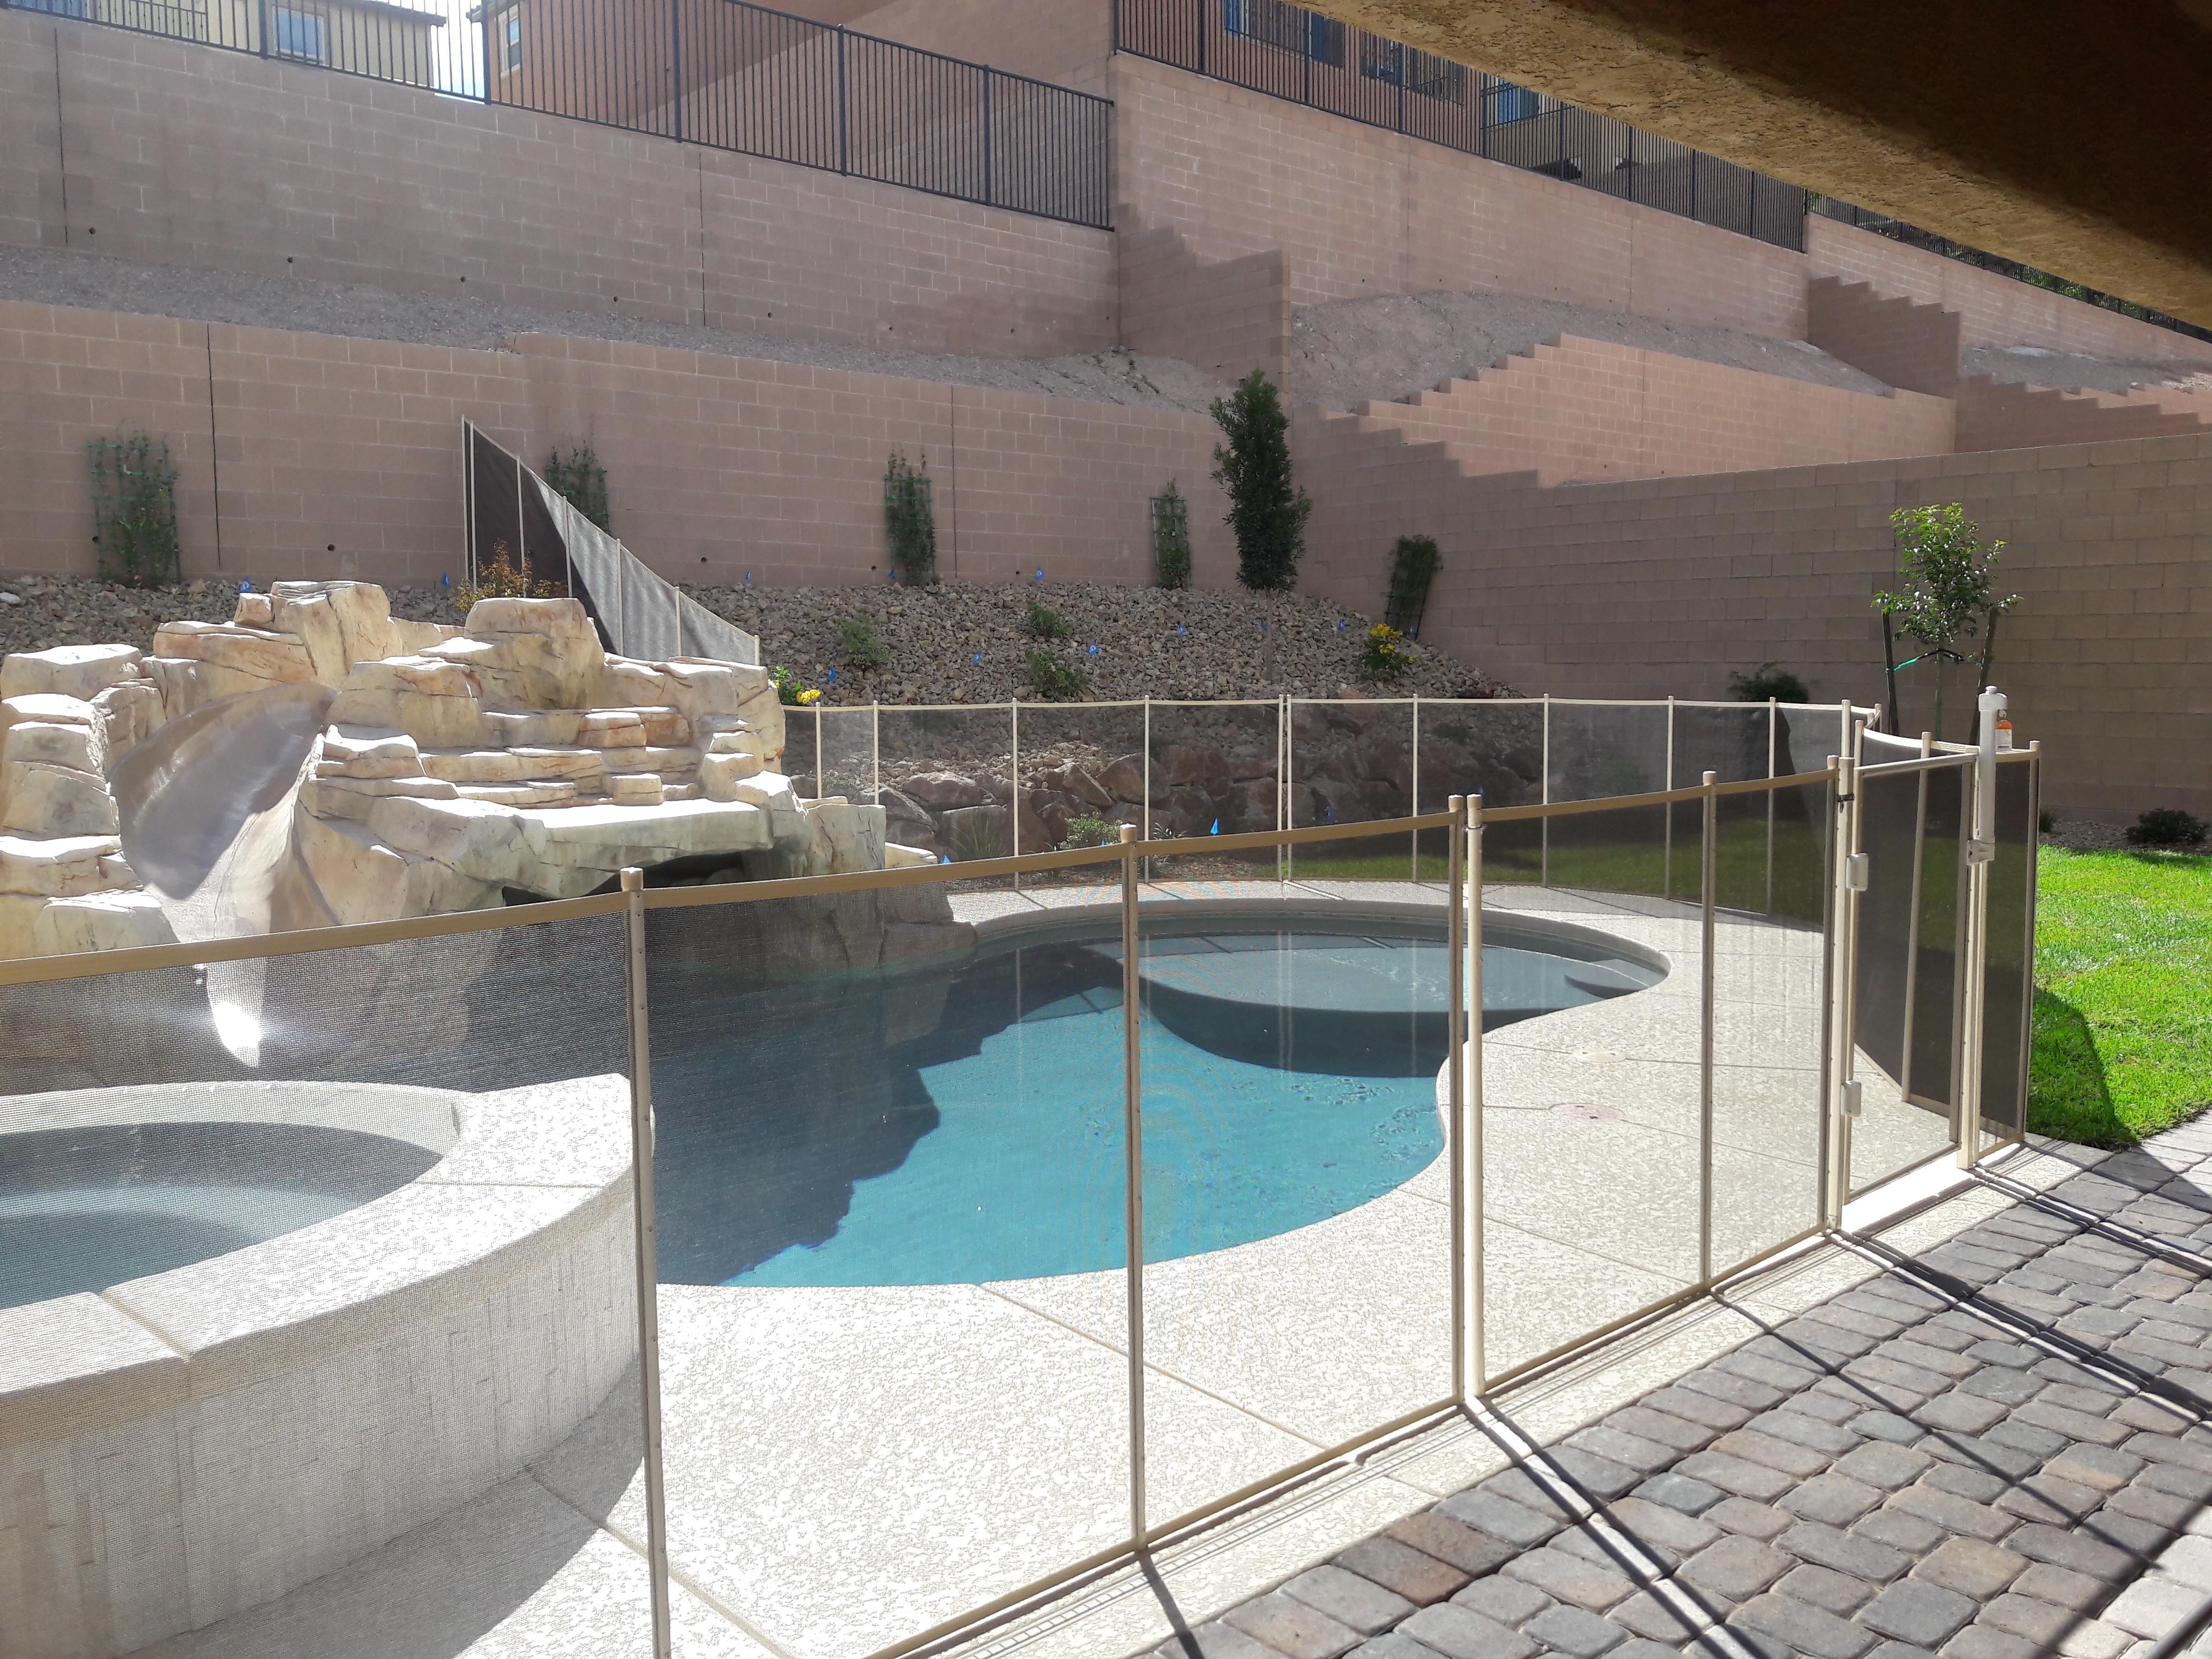 pool safety fences, safety fence, pool gate from Safe Defenses Las Vegas